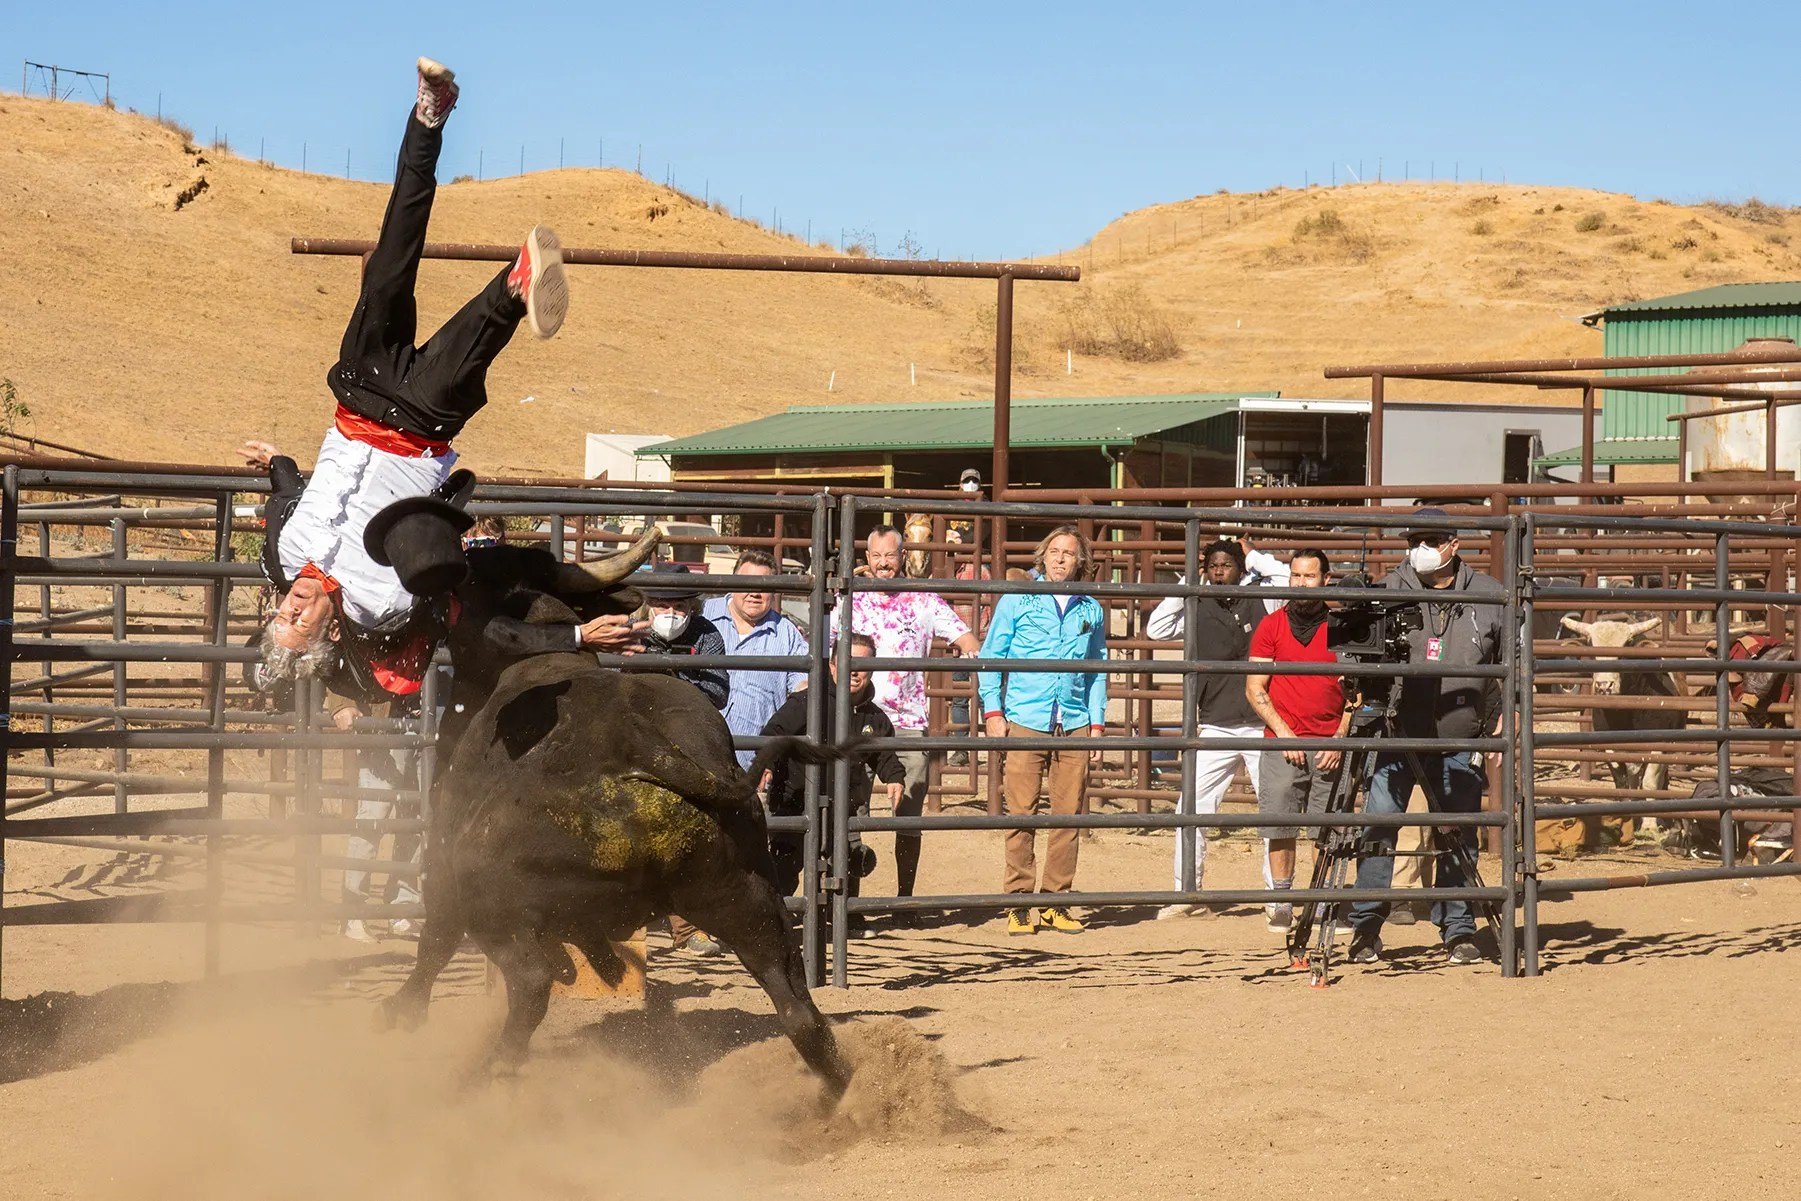 Johnny Knoxville gets pummeled by a bull in 'Jackass Forever'